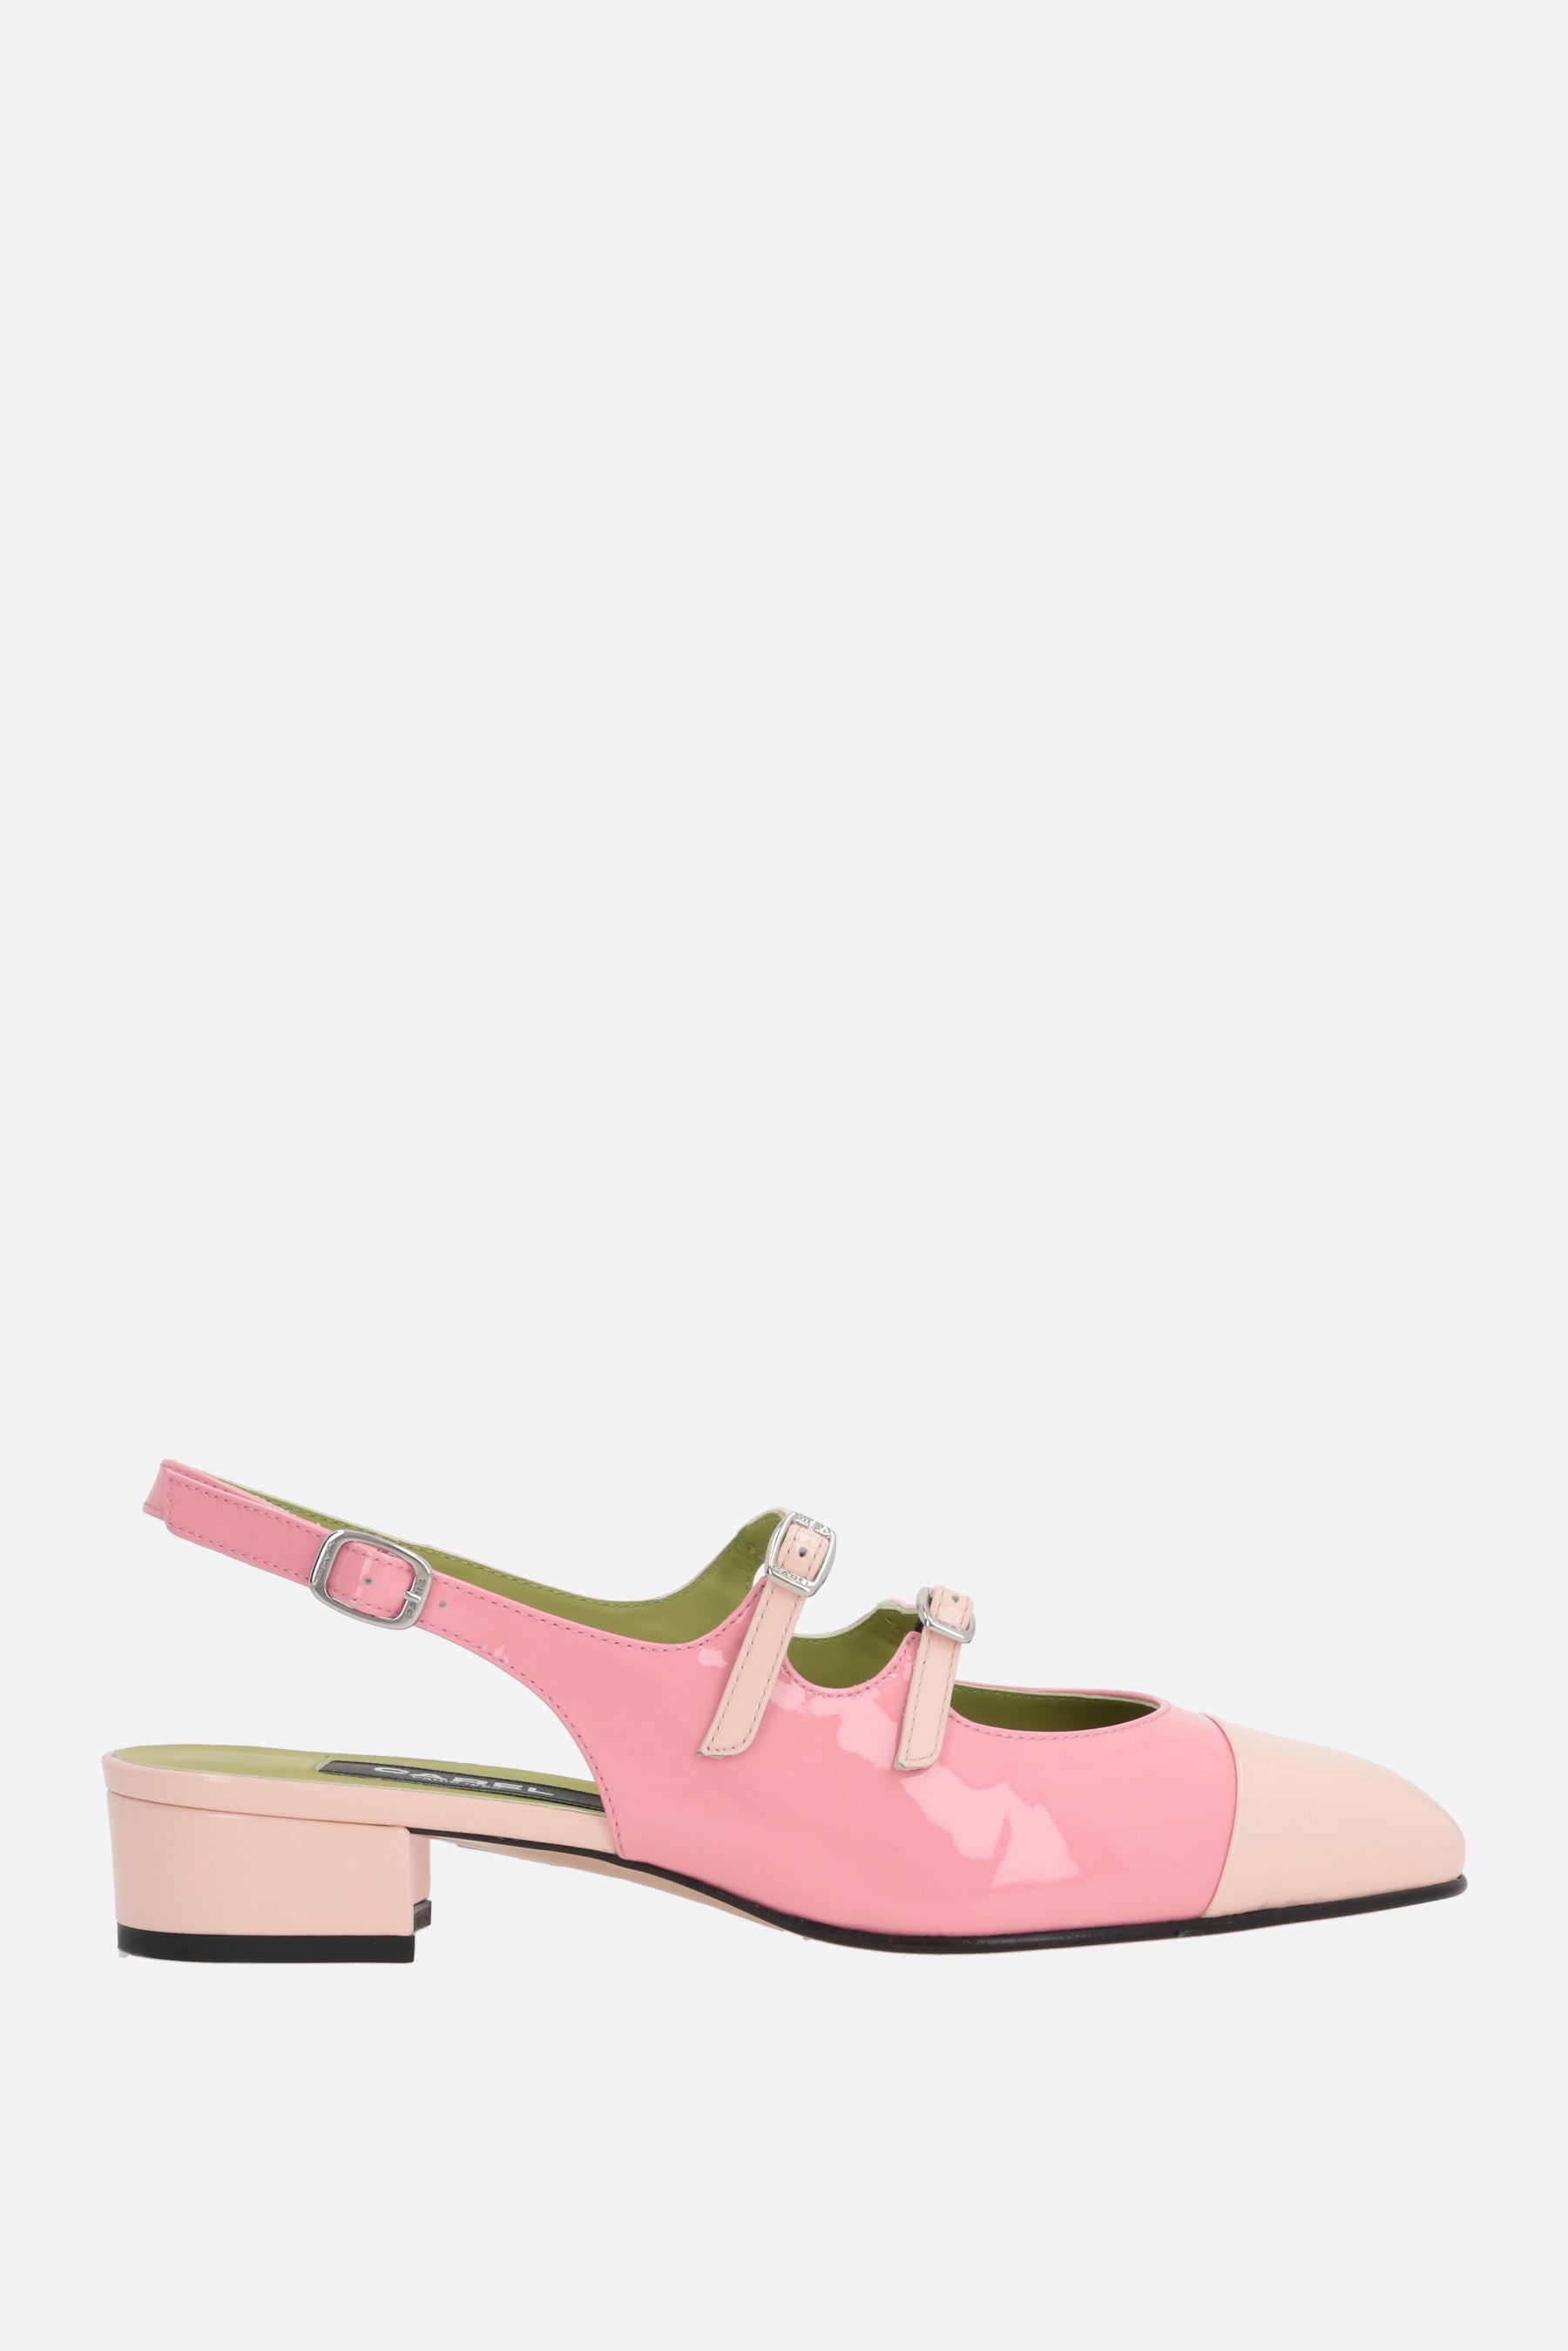 Abricot bicolor patent leather mary-jane slingbacks